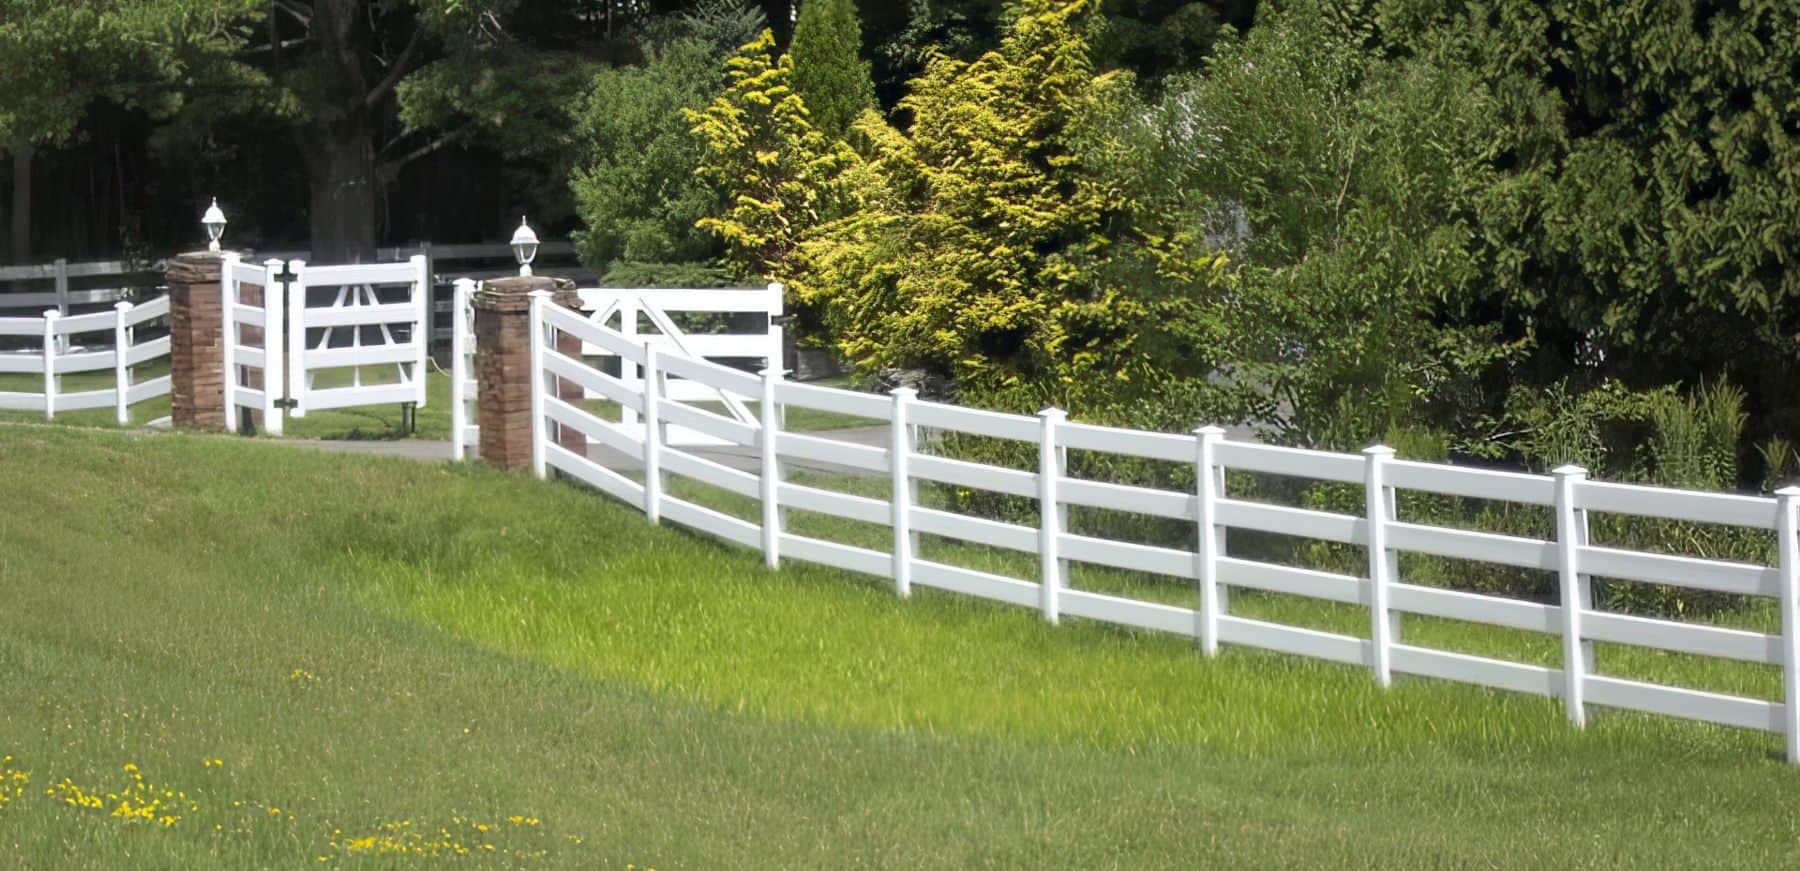 Vinyl 4-rail ranch fence under a clear sky with double gate and trees in the background.